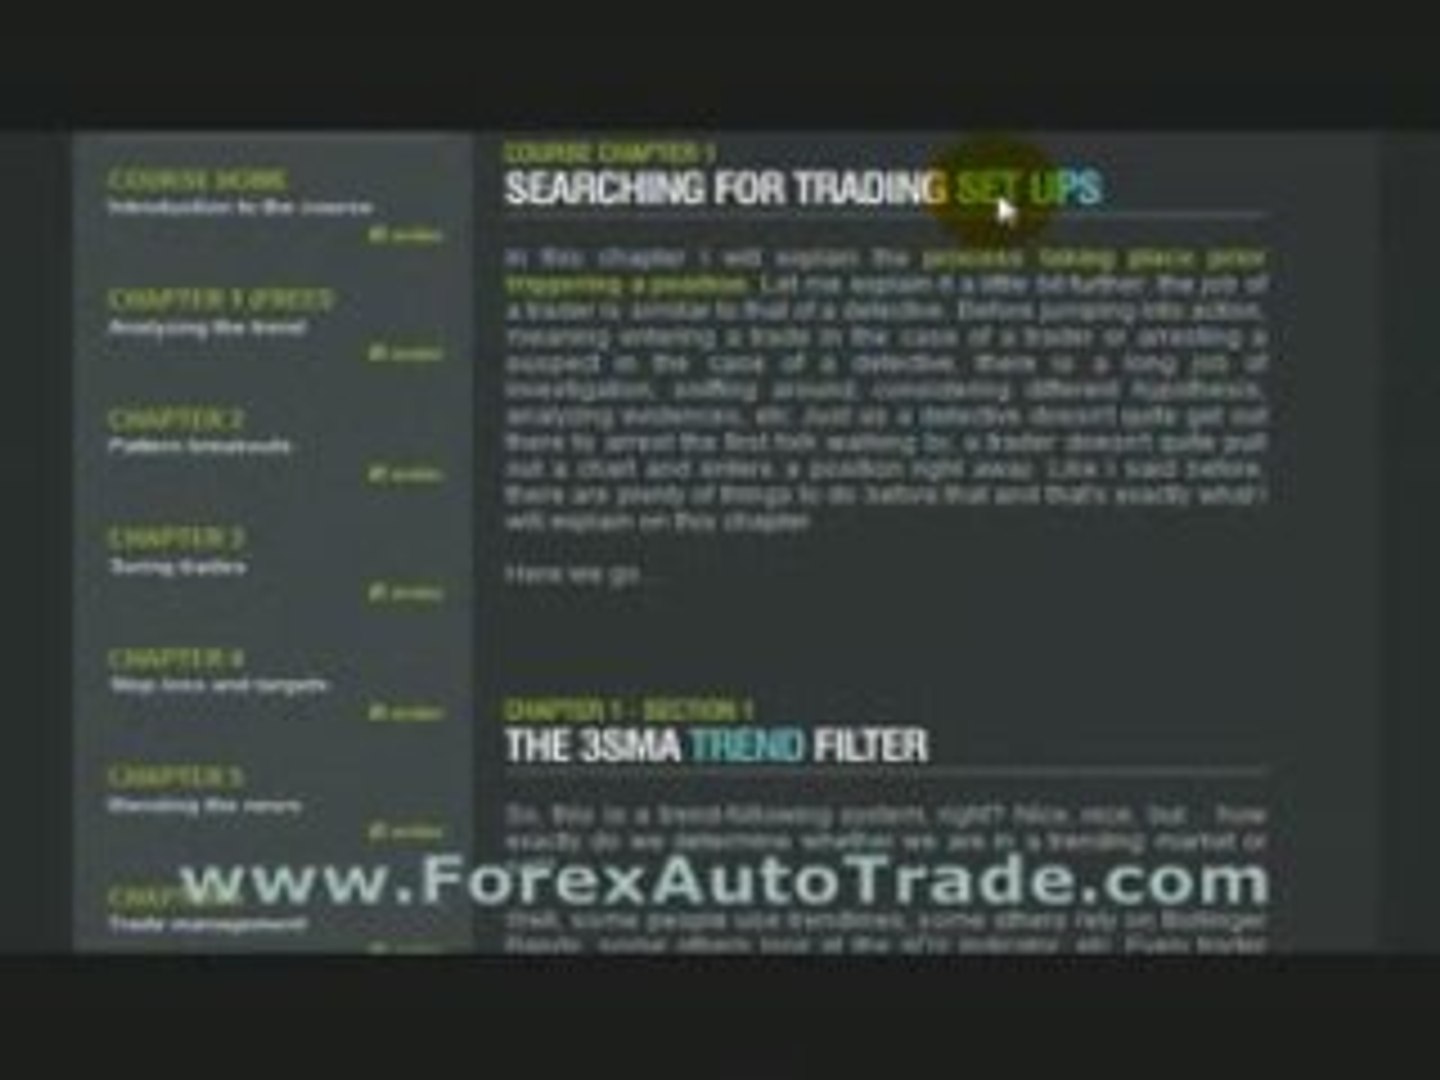 Hector trader forex.trading.course complete subject section 8 investing